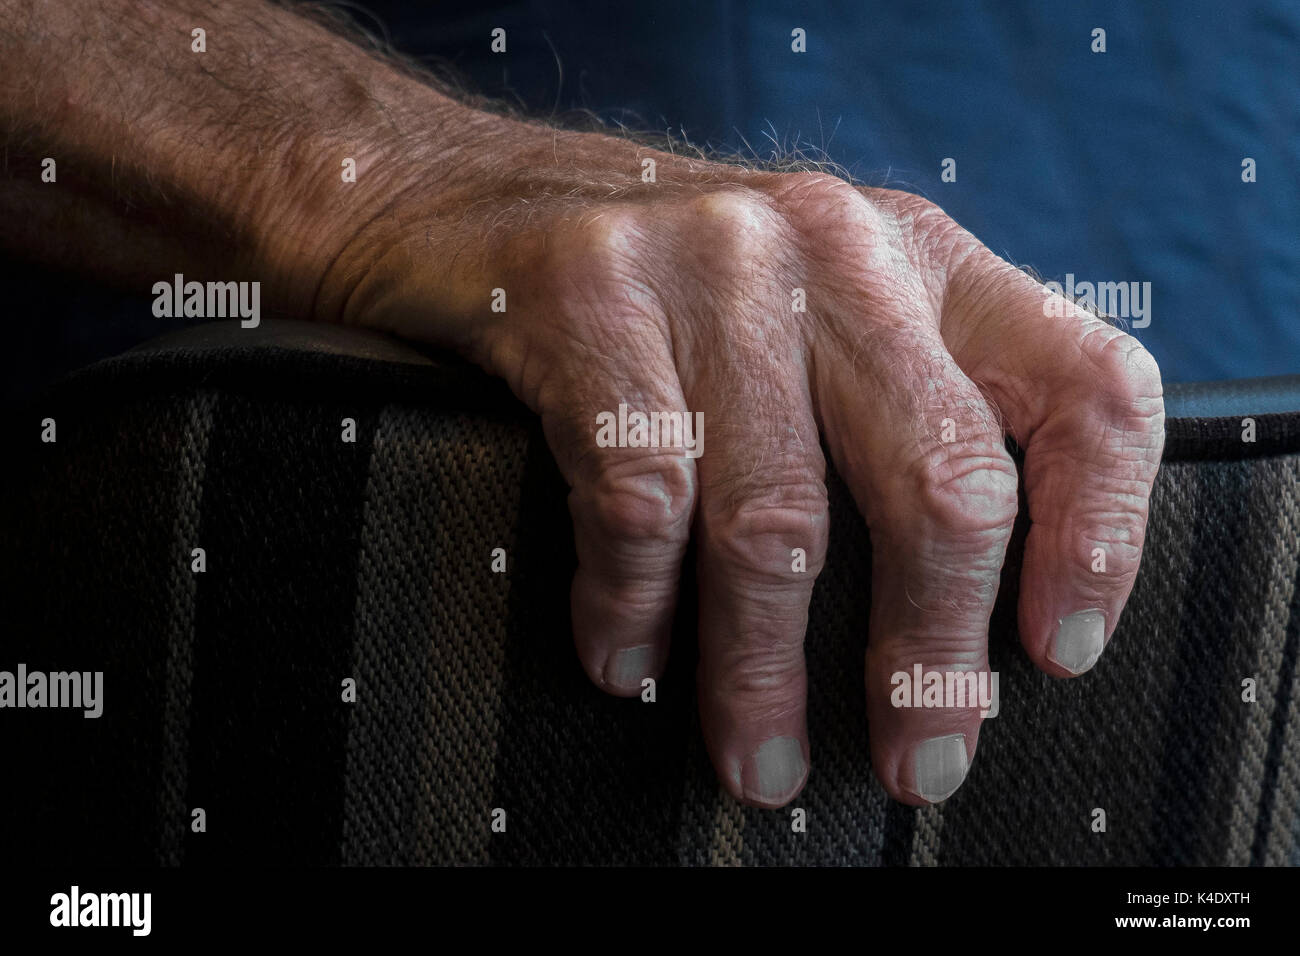 Hand - a closeup view of the hand of an elderly person holding the back of a chair. Stock Photo